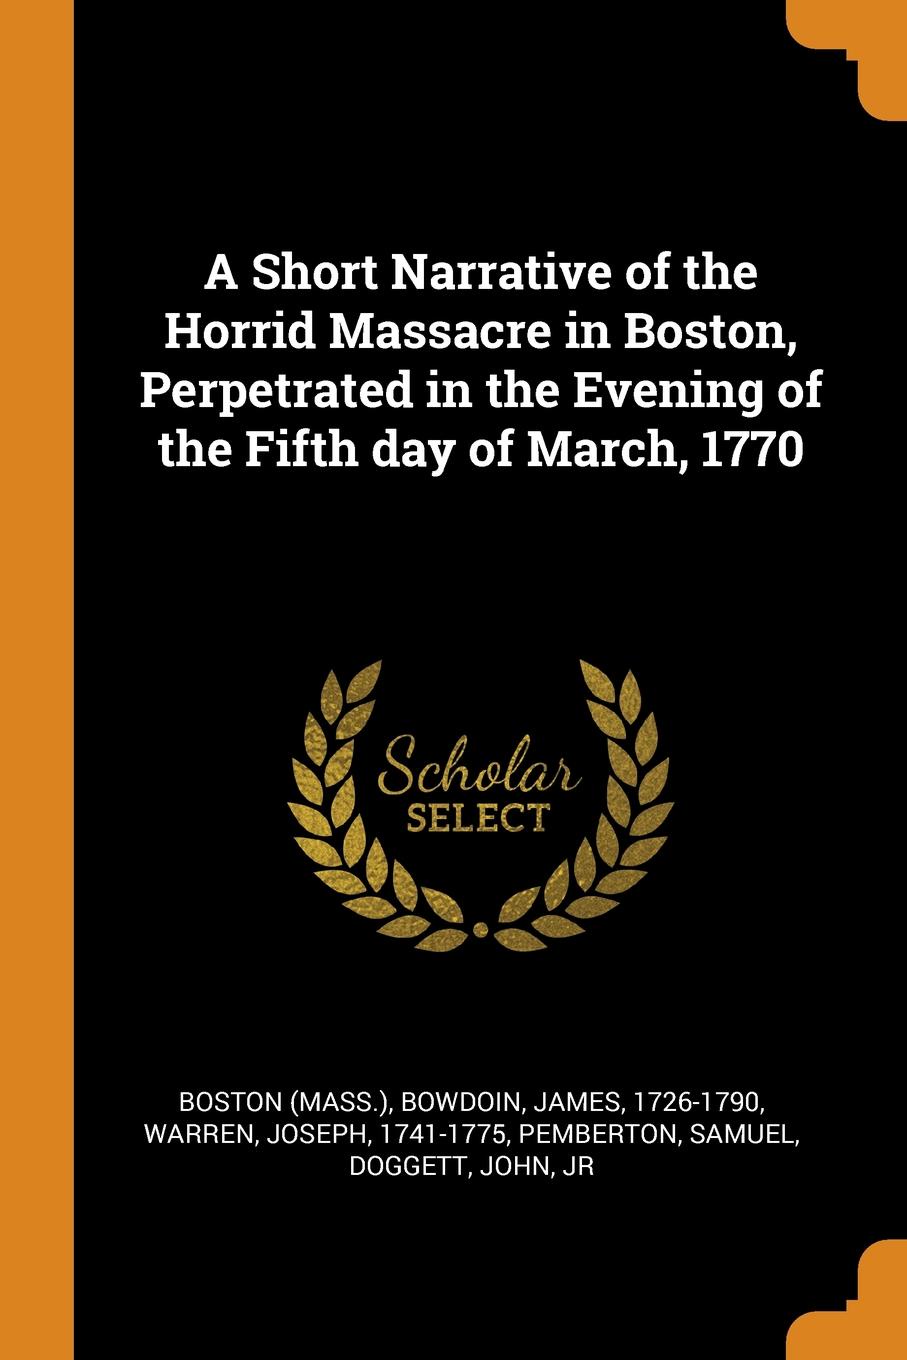 A Short Narrative of the Horrid Massacre in Boston, Perpetrated in the Evening of the Fifth day of March, 1770